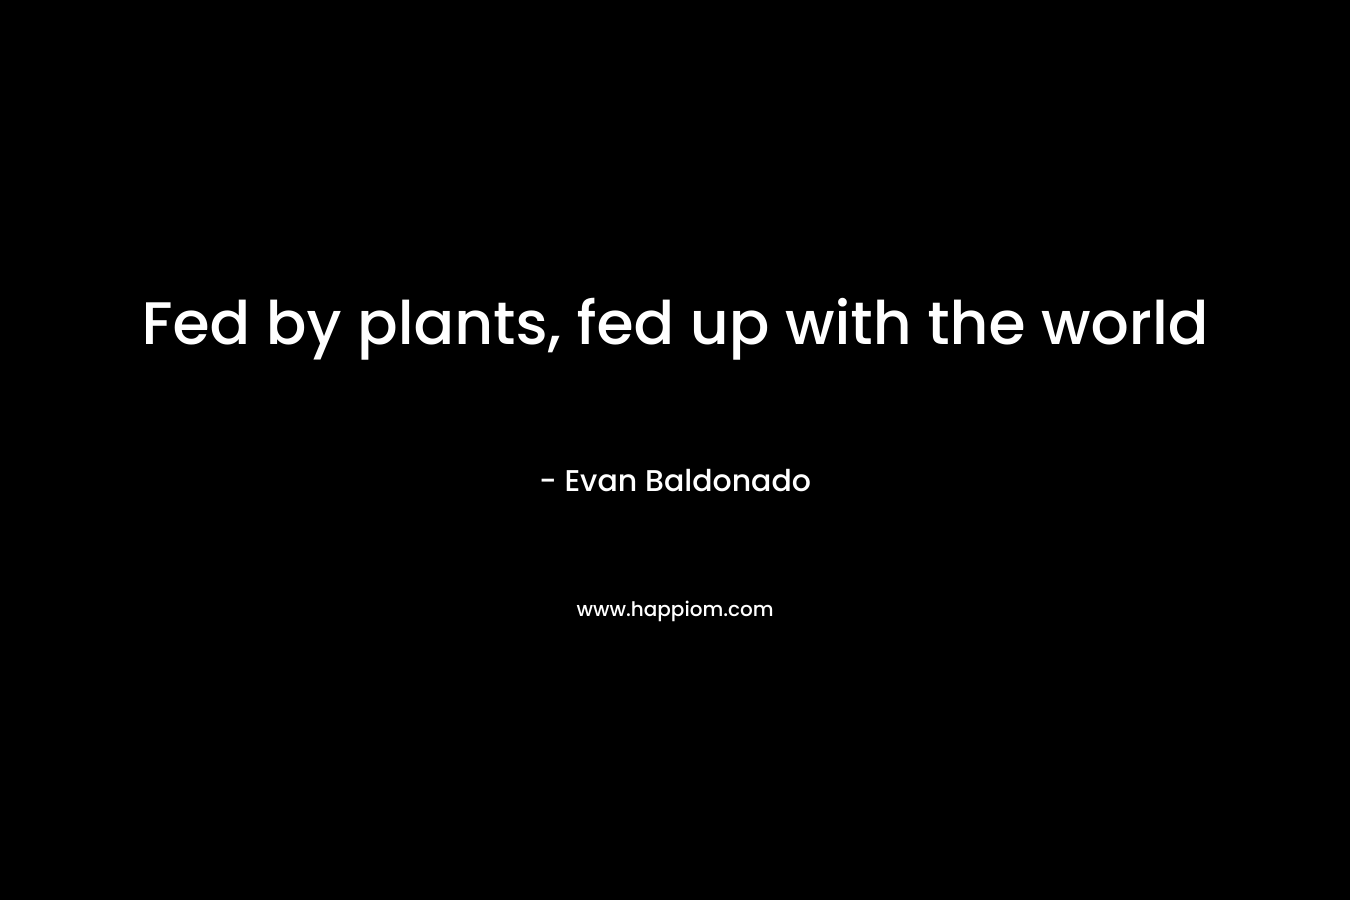 Fed by plants, fed up with the world – Evan Baldonado